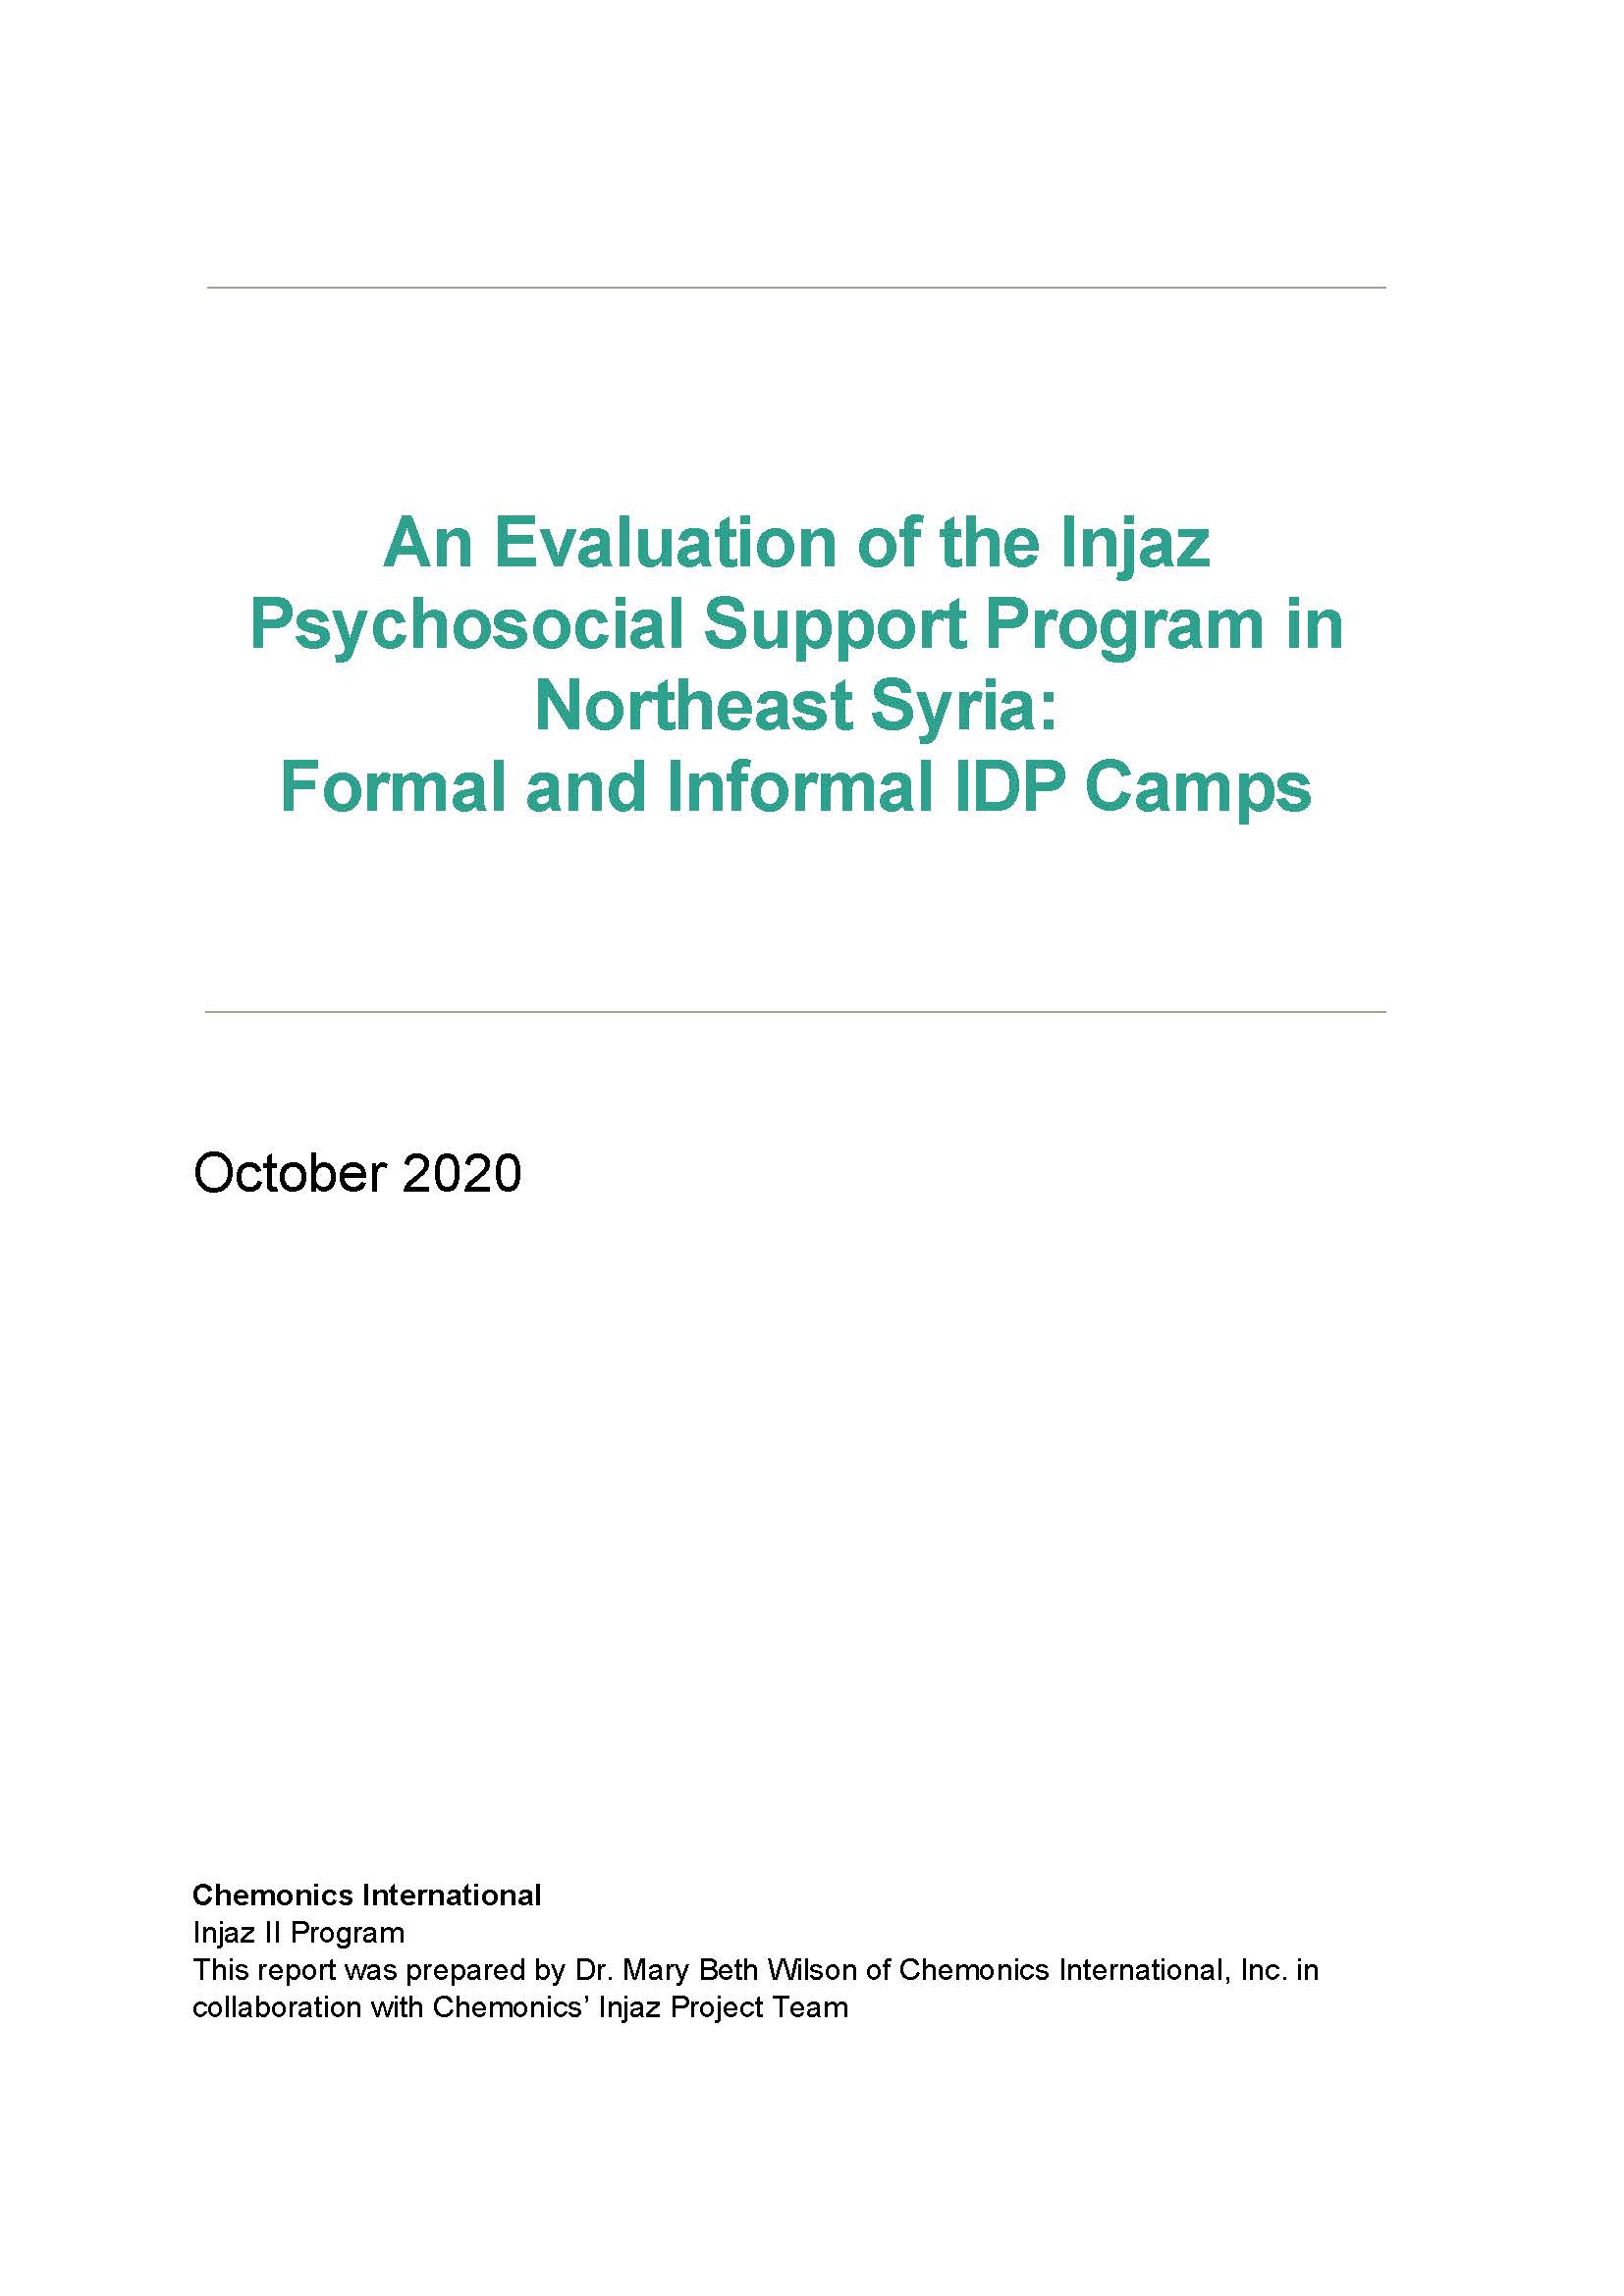 Front cover of the Injaz Psychosocial Support Program report